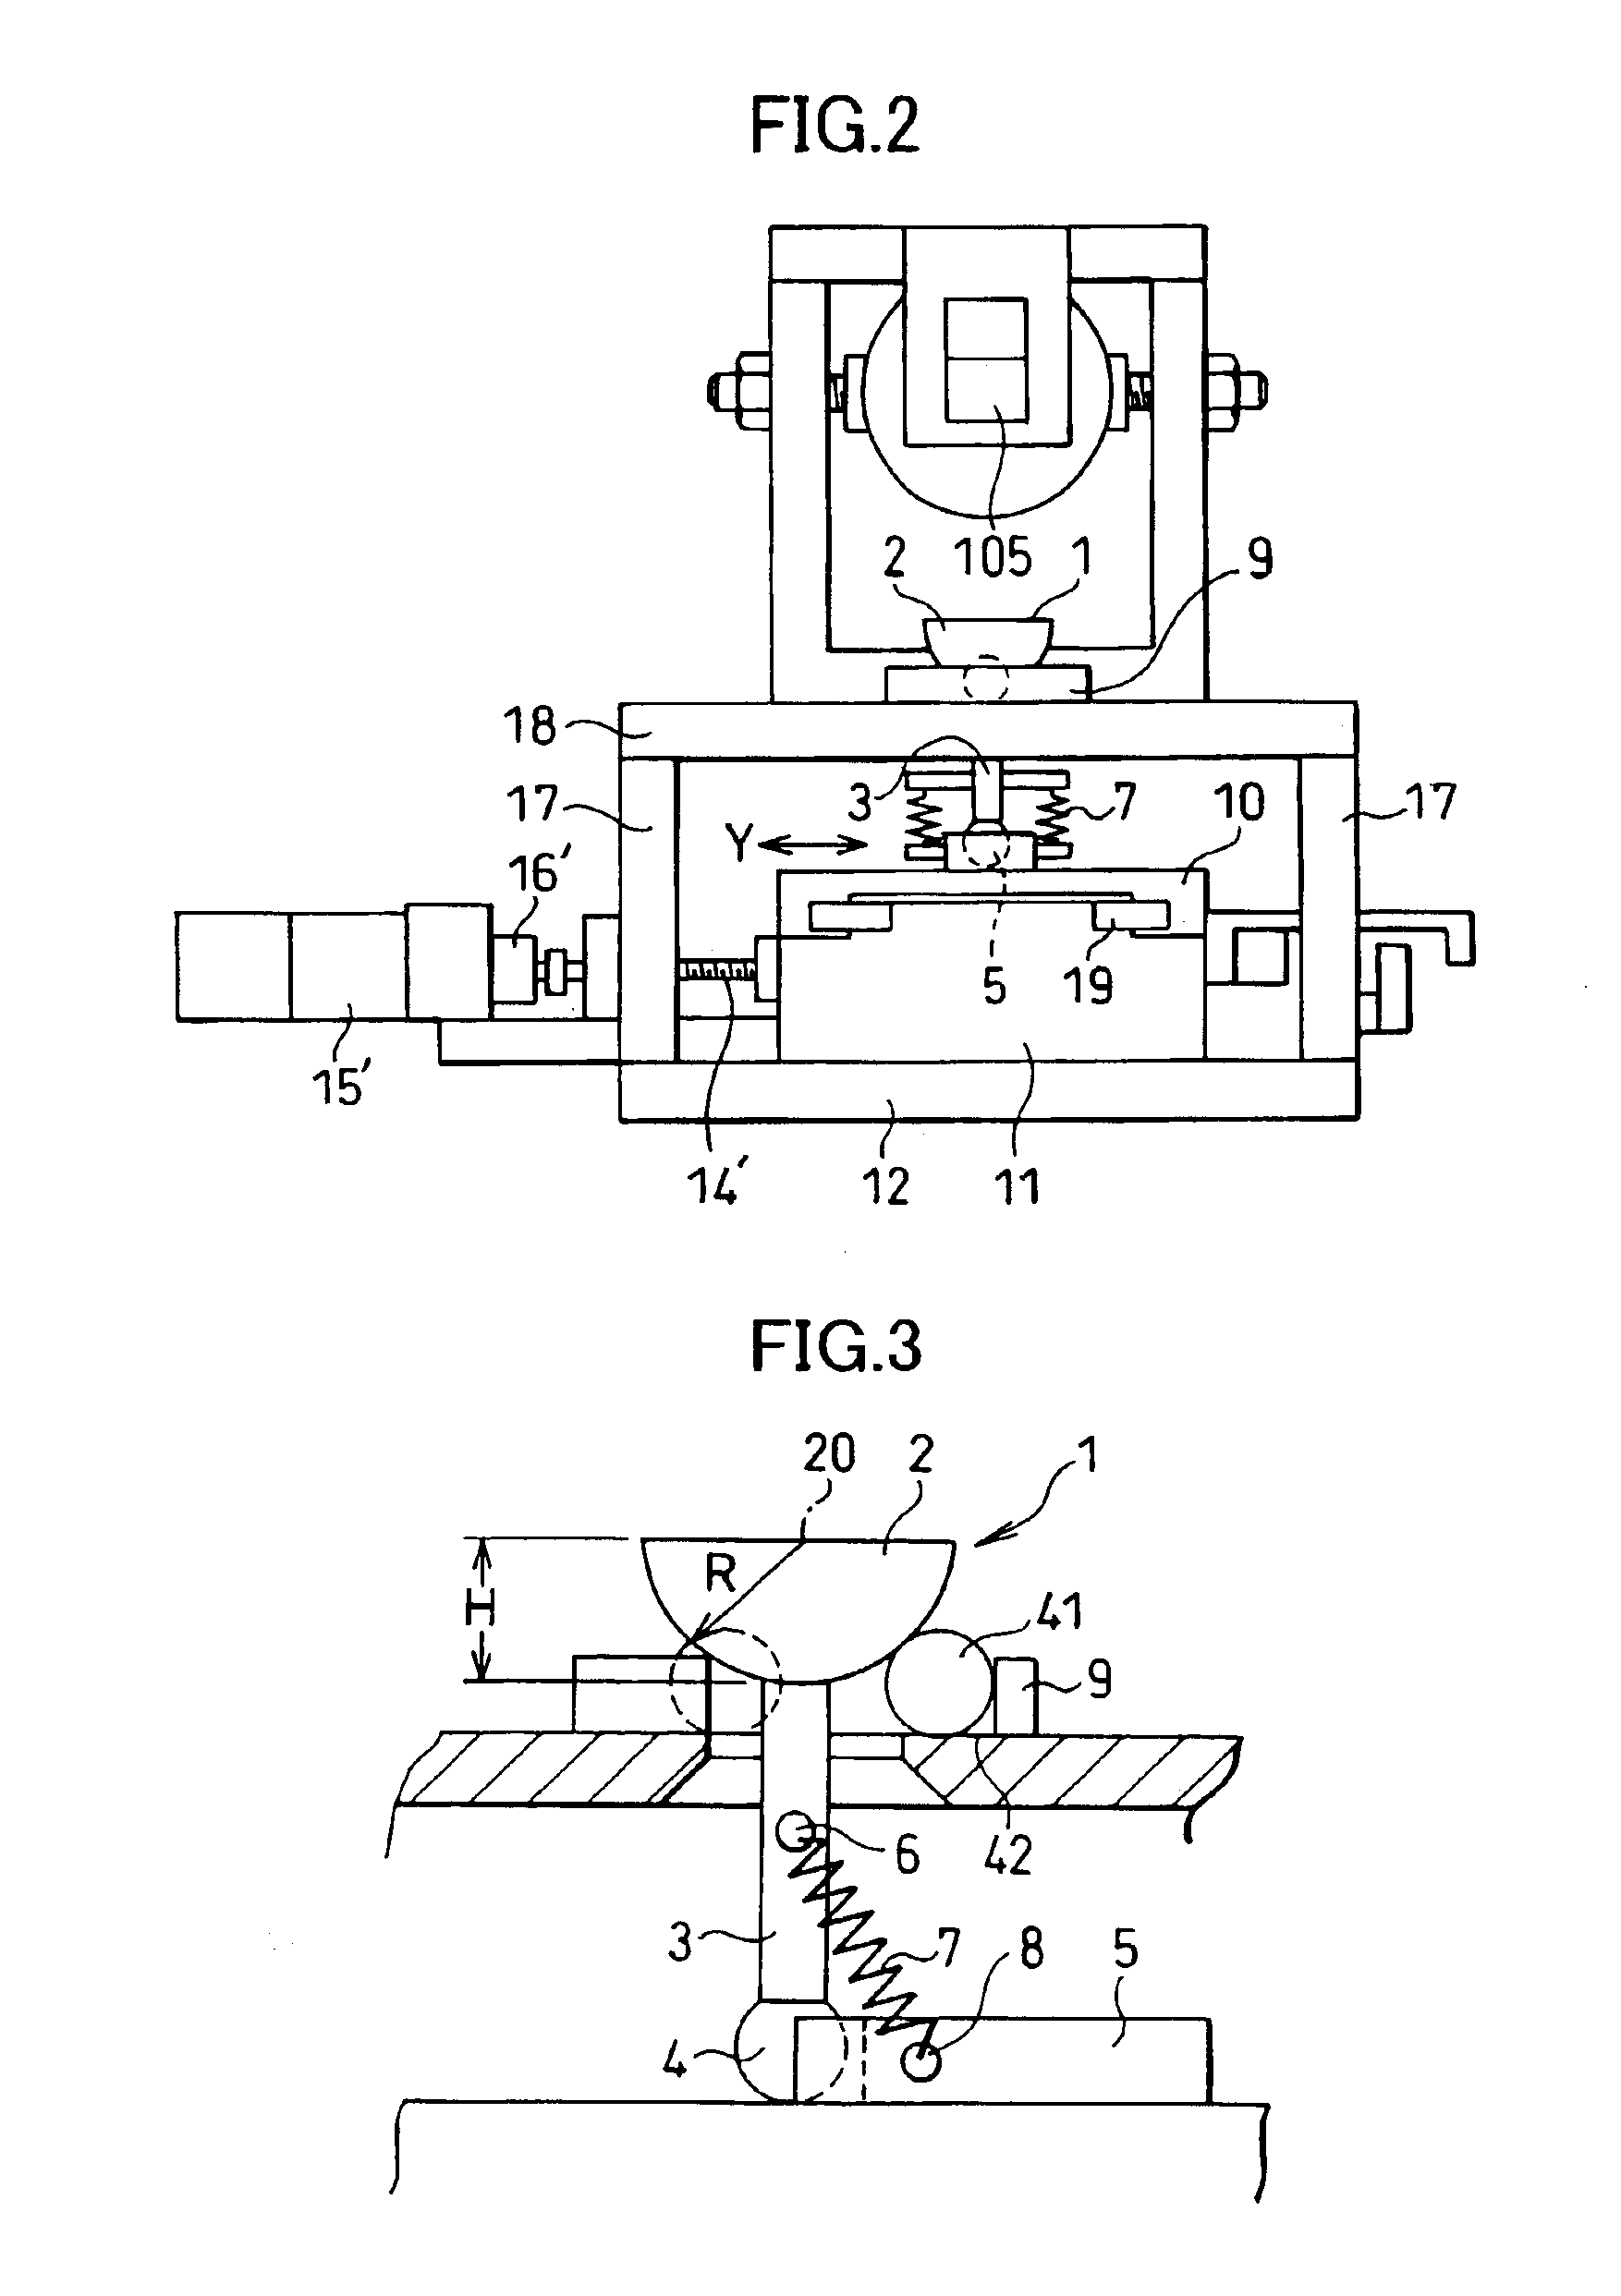 Method of measuring length and coordinates using laser tracking interferometric length measuring instruments